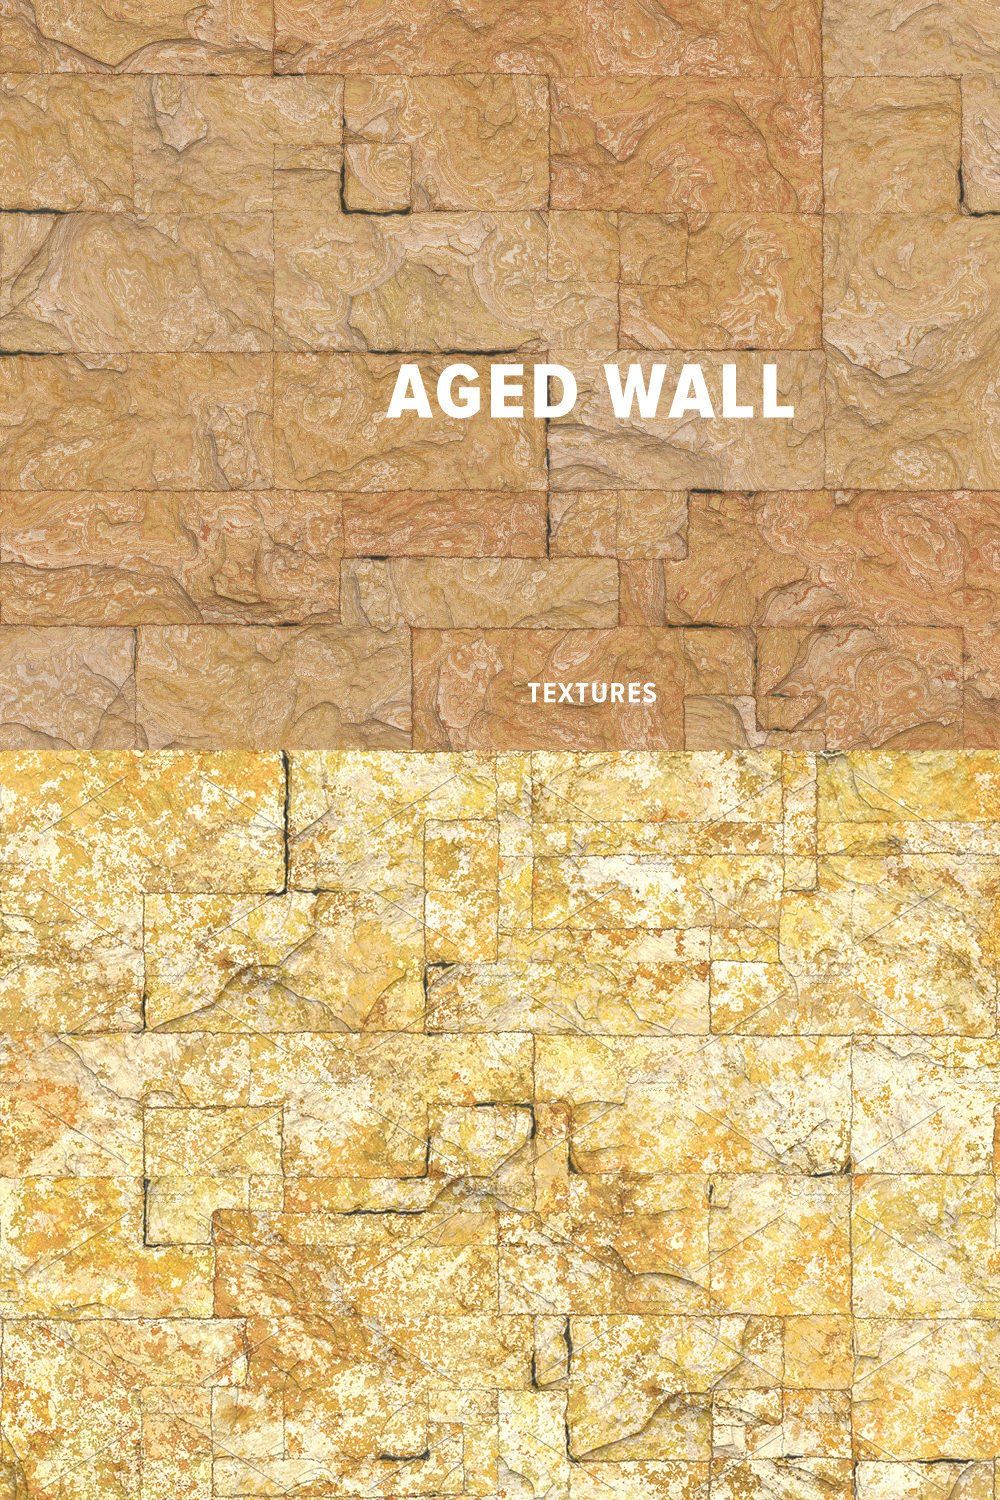 Aged wall textures pinterest preview image.